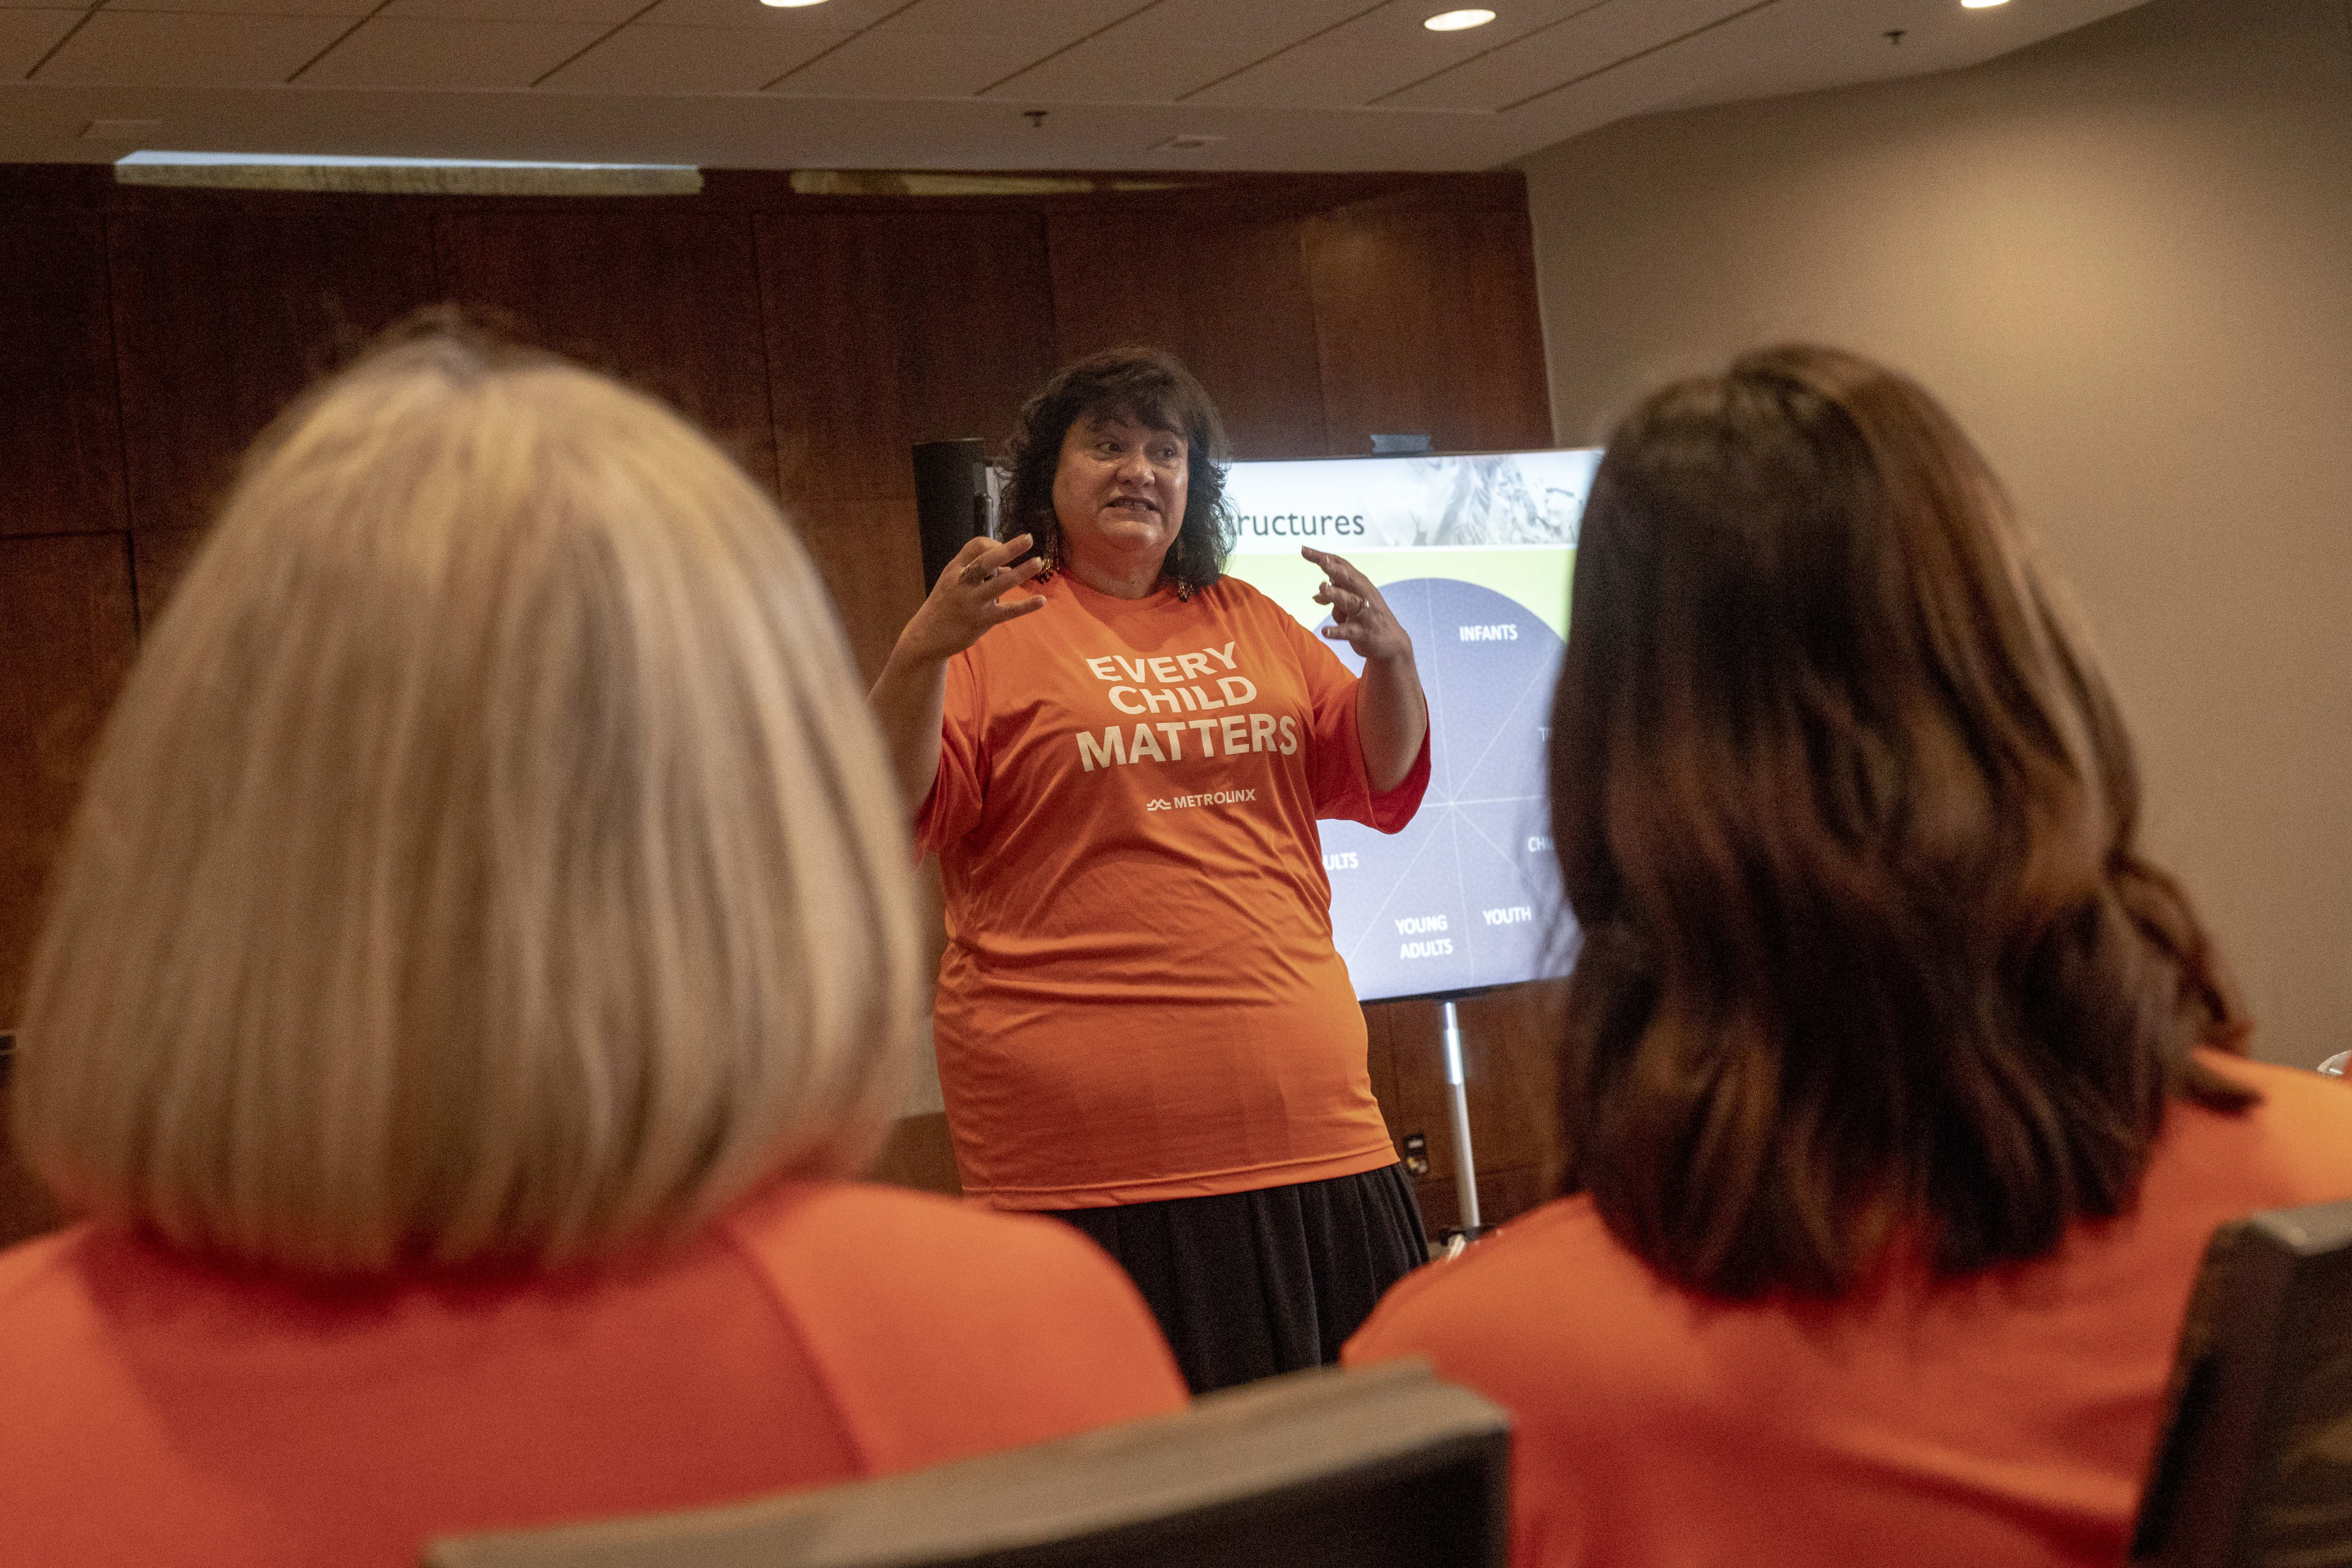 A speaker shares lived experience in an Orange Shirt Day training session.